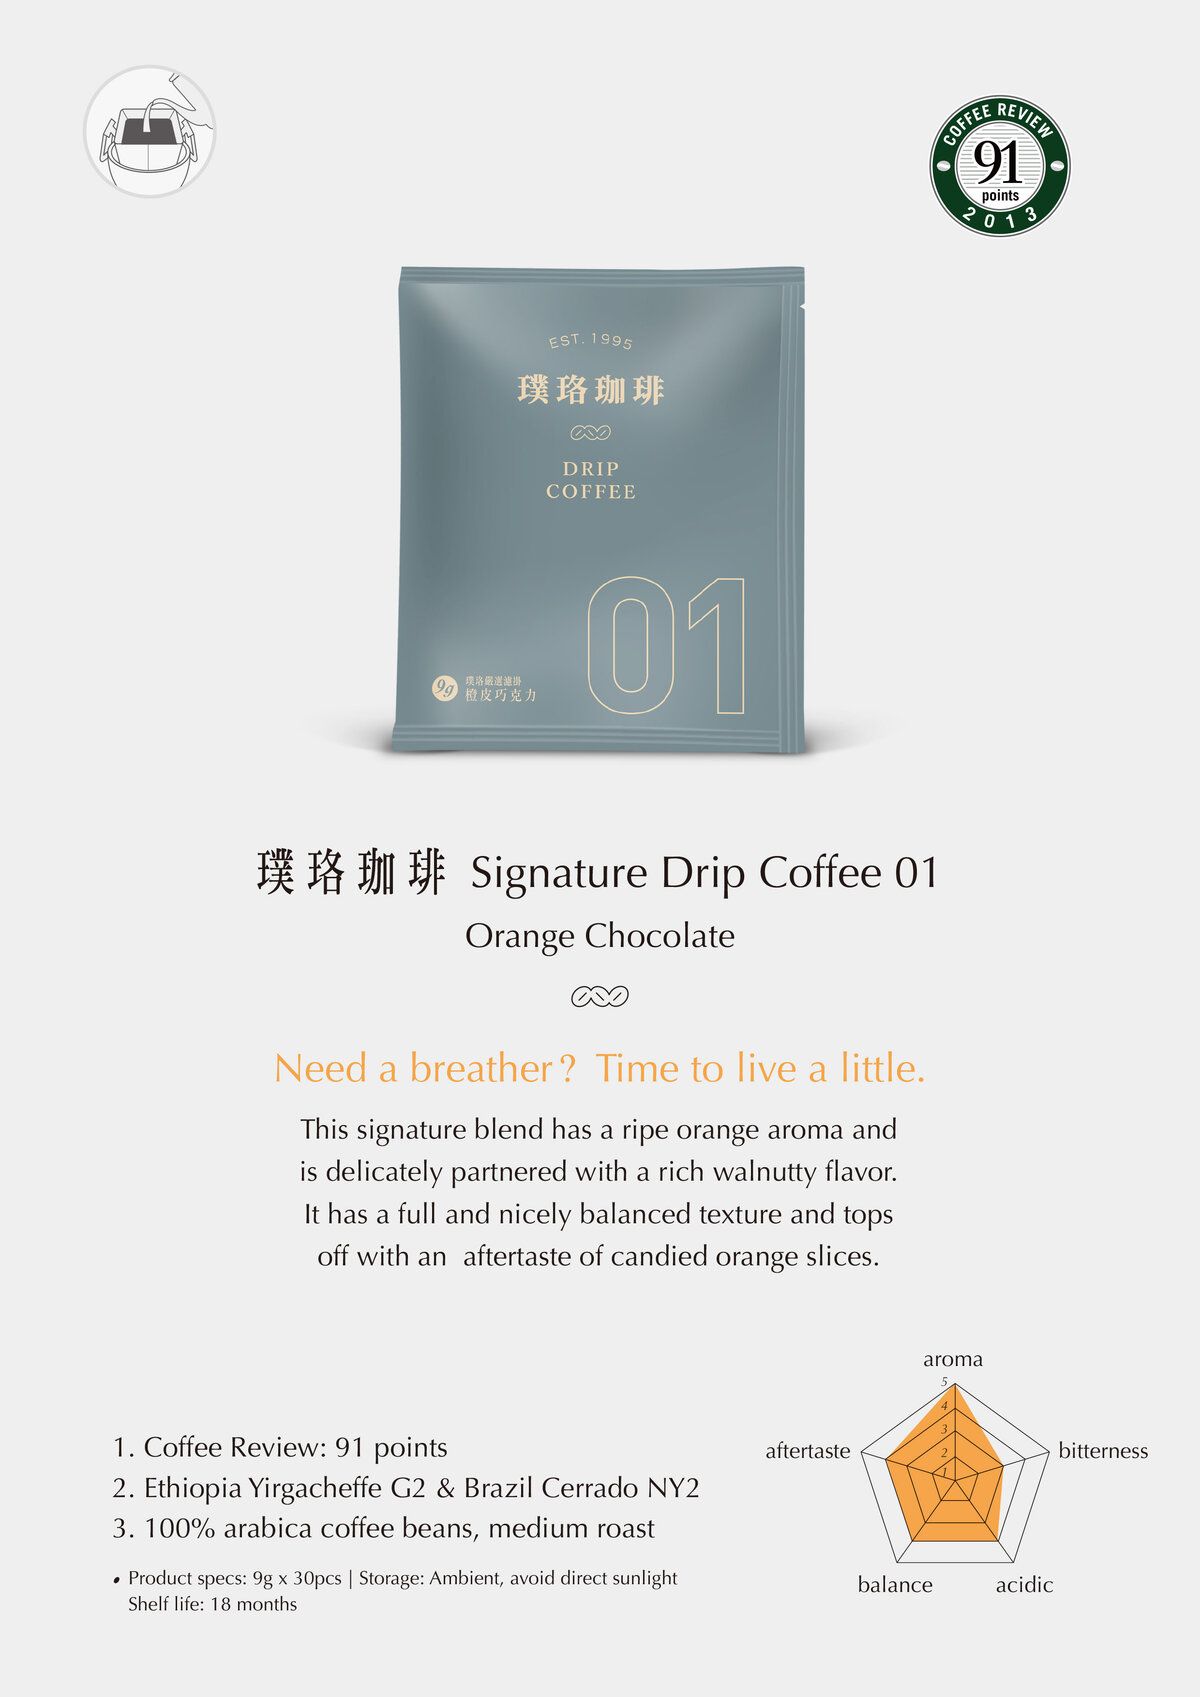 more information about drip coffee orange chocolate